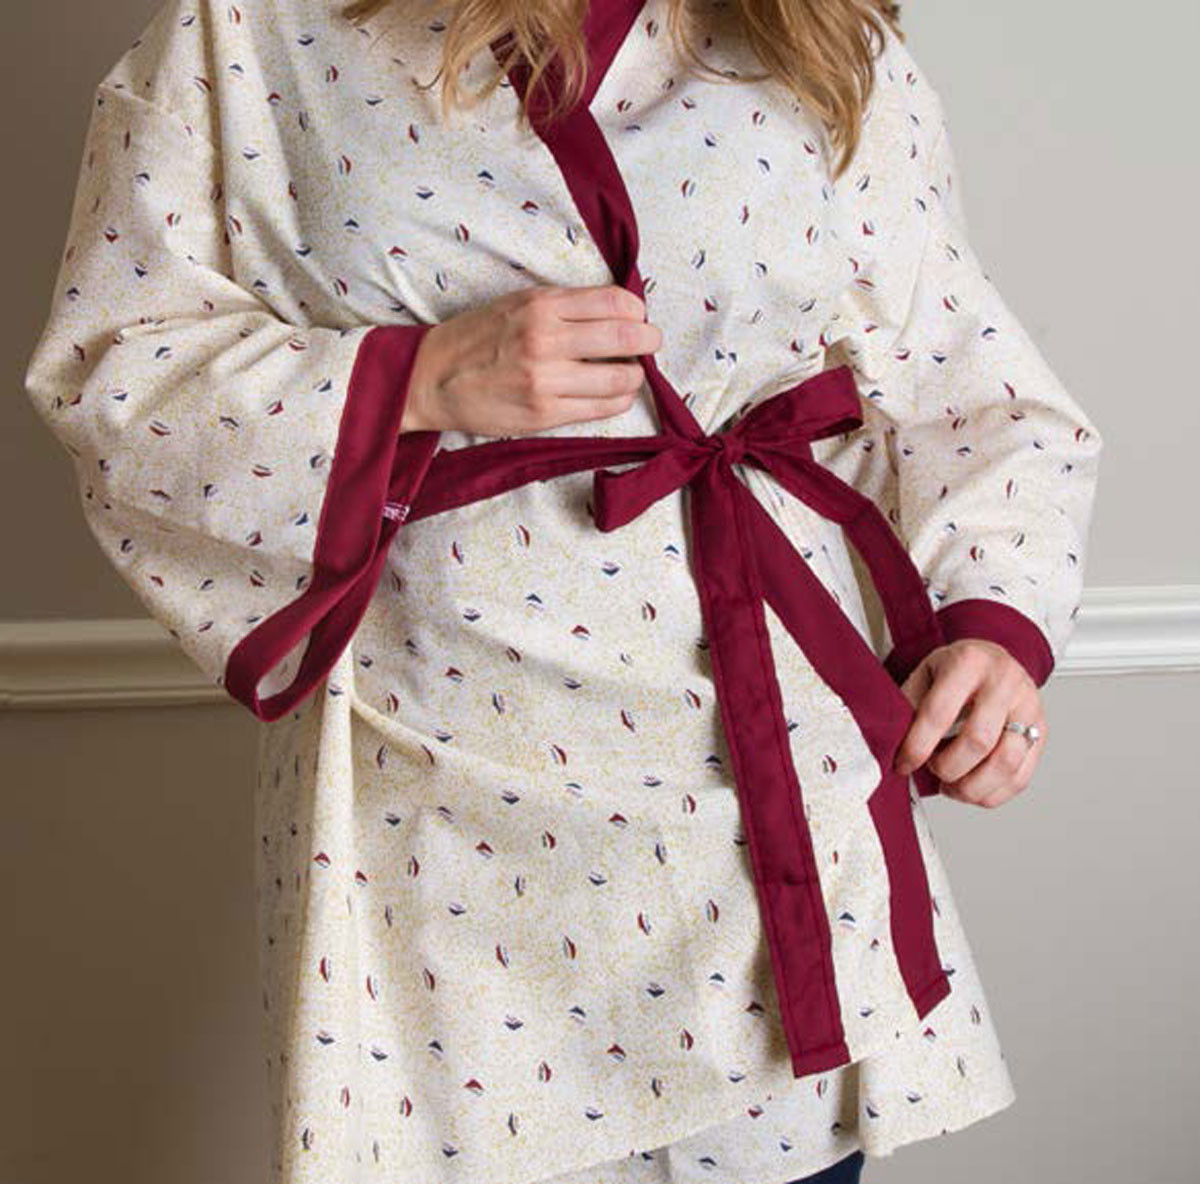 What advantages do these mammography gowns provide in the form of capes and robes?